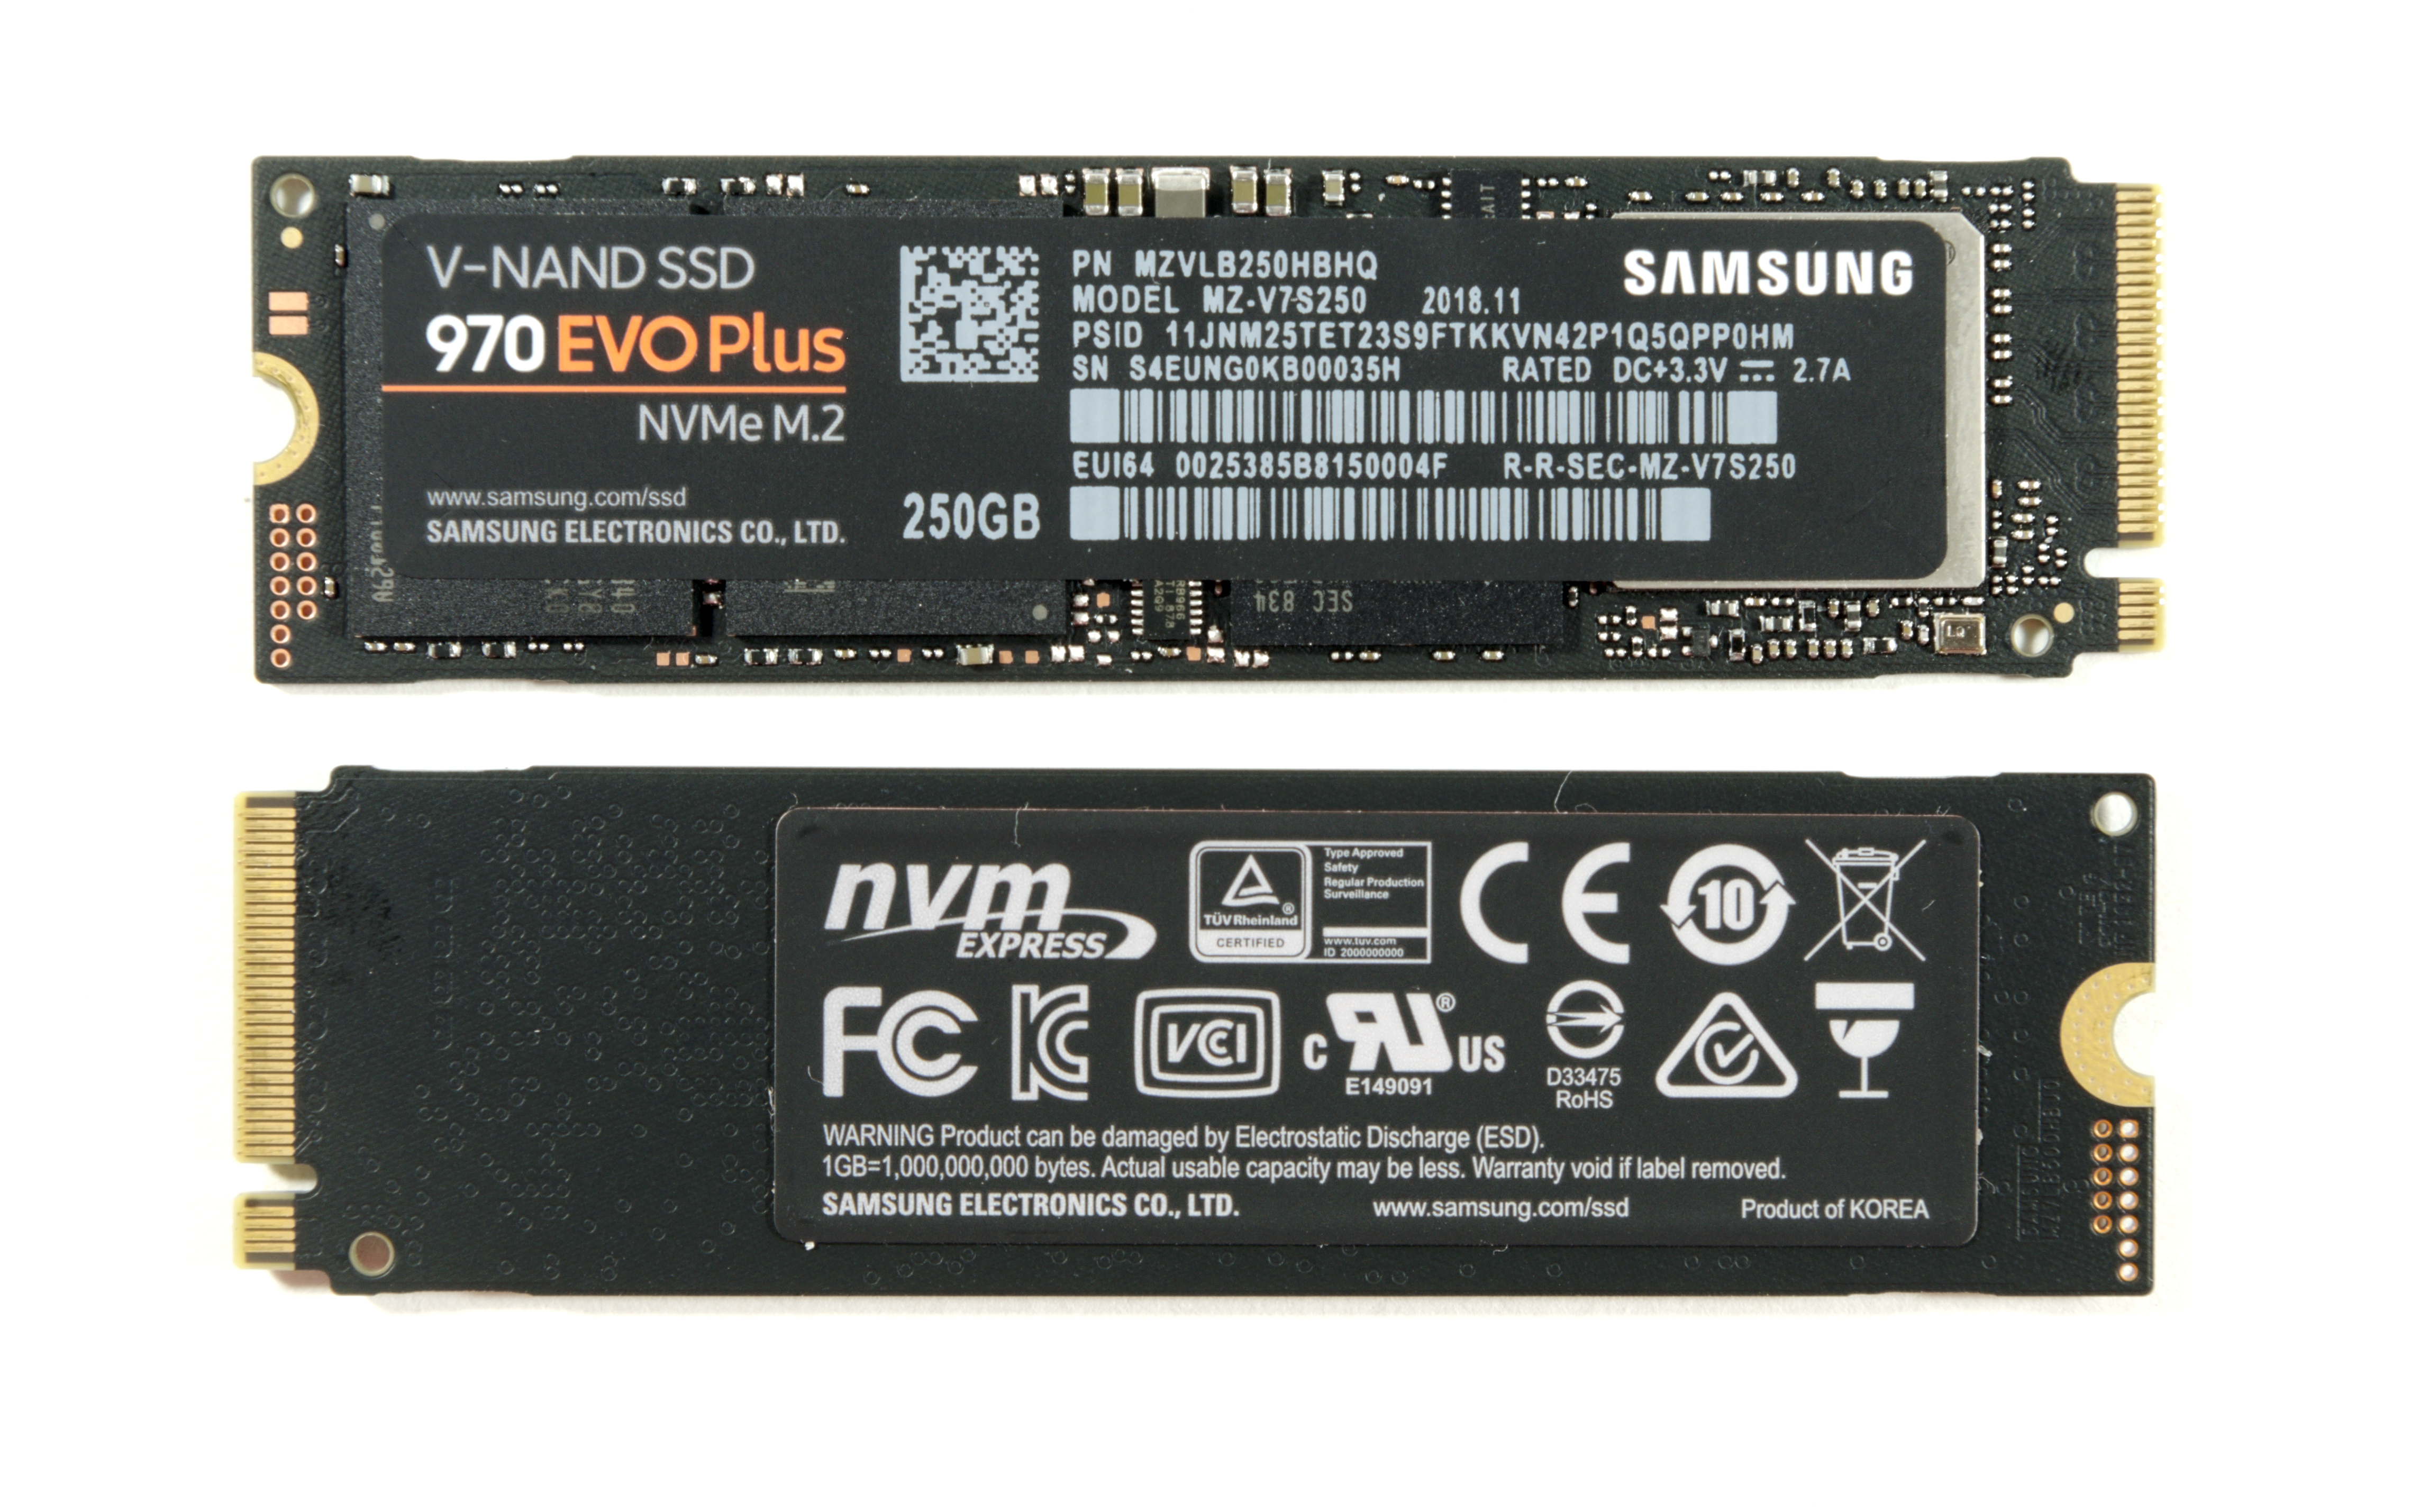 The Samsung 970 Plus (250GB, NVMe SSD Review: 3D NAND